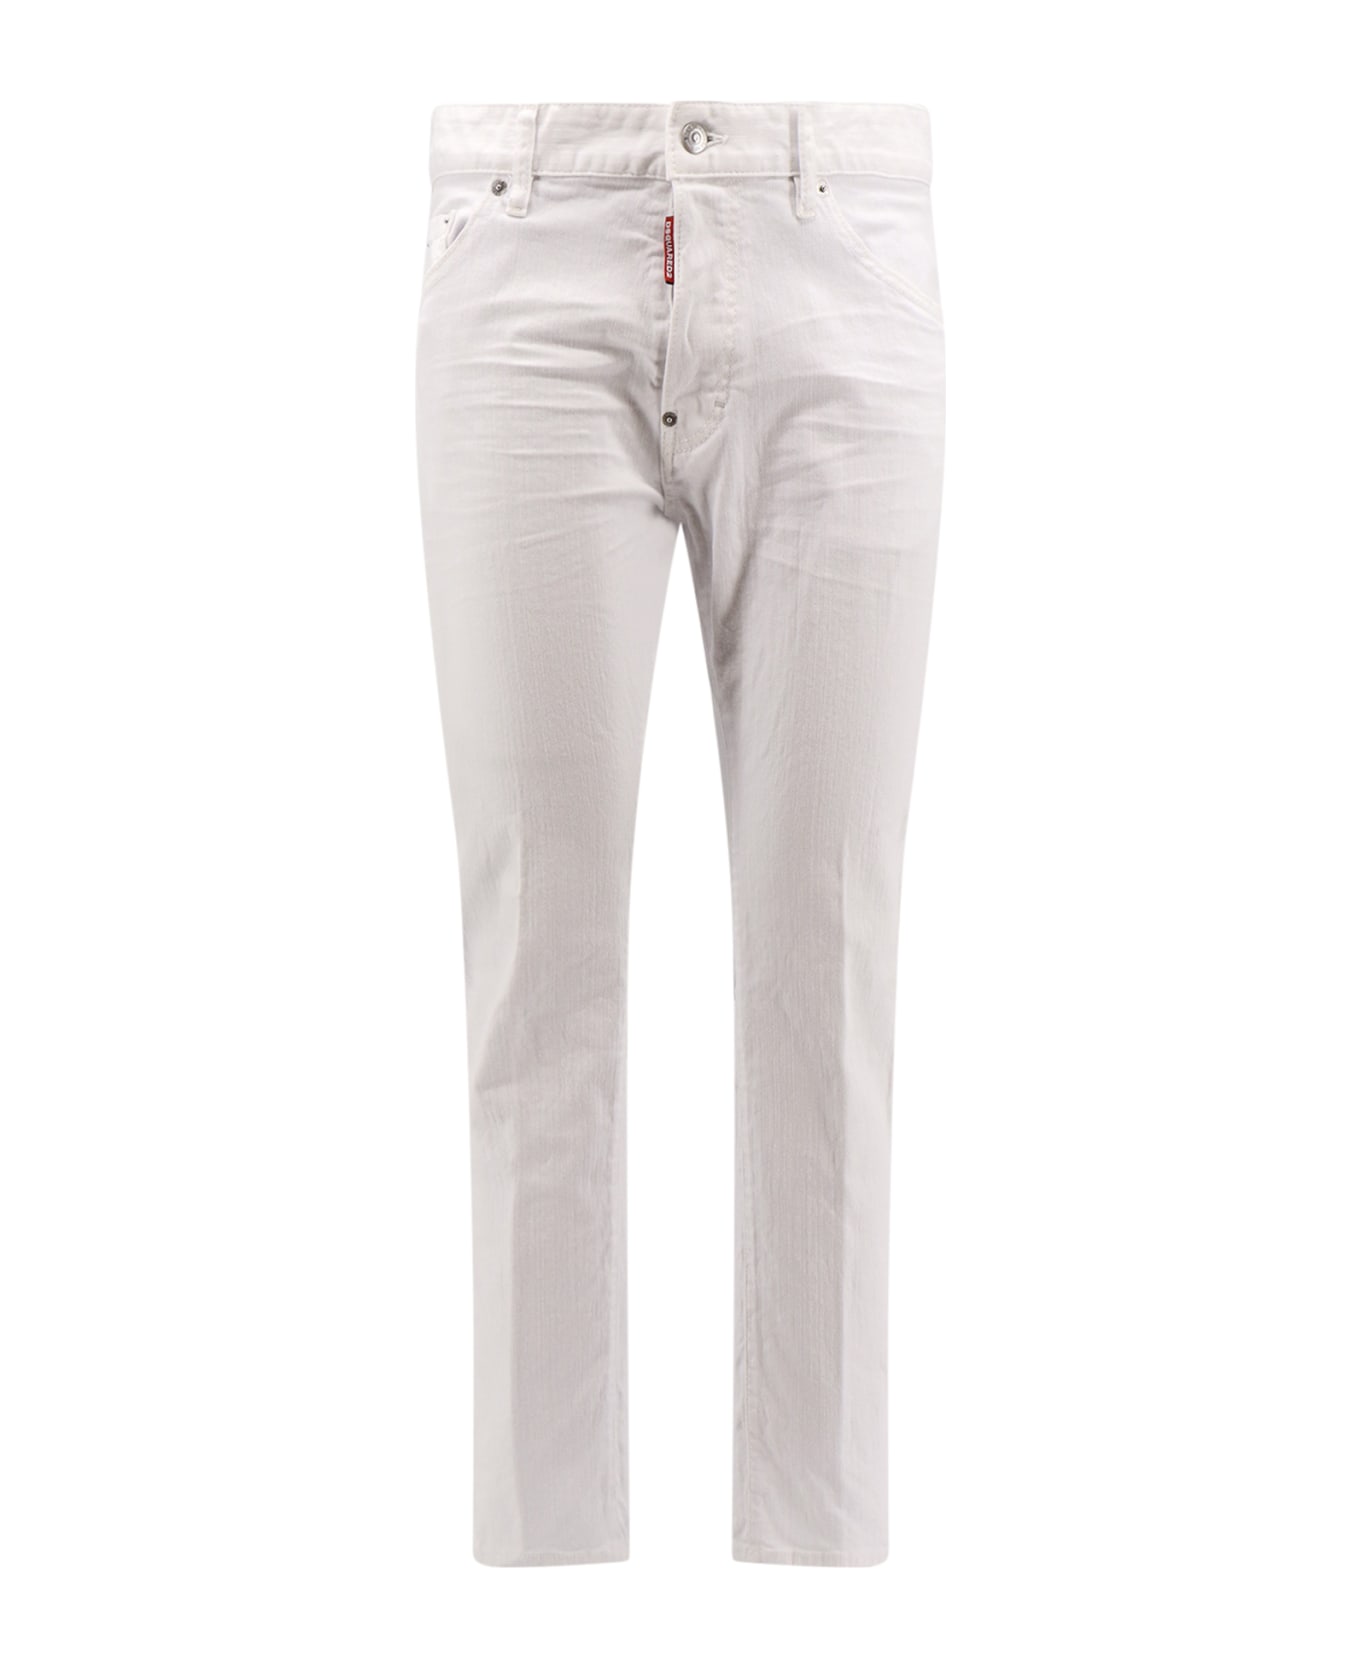 Dsquared2 Cool Guy Jeans - White ボトムス